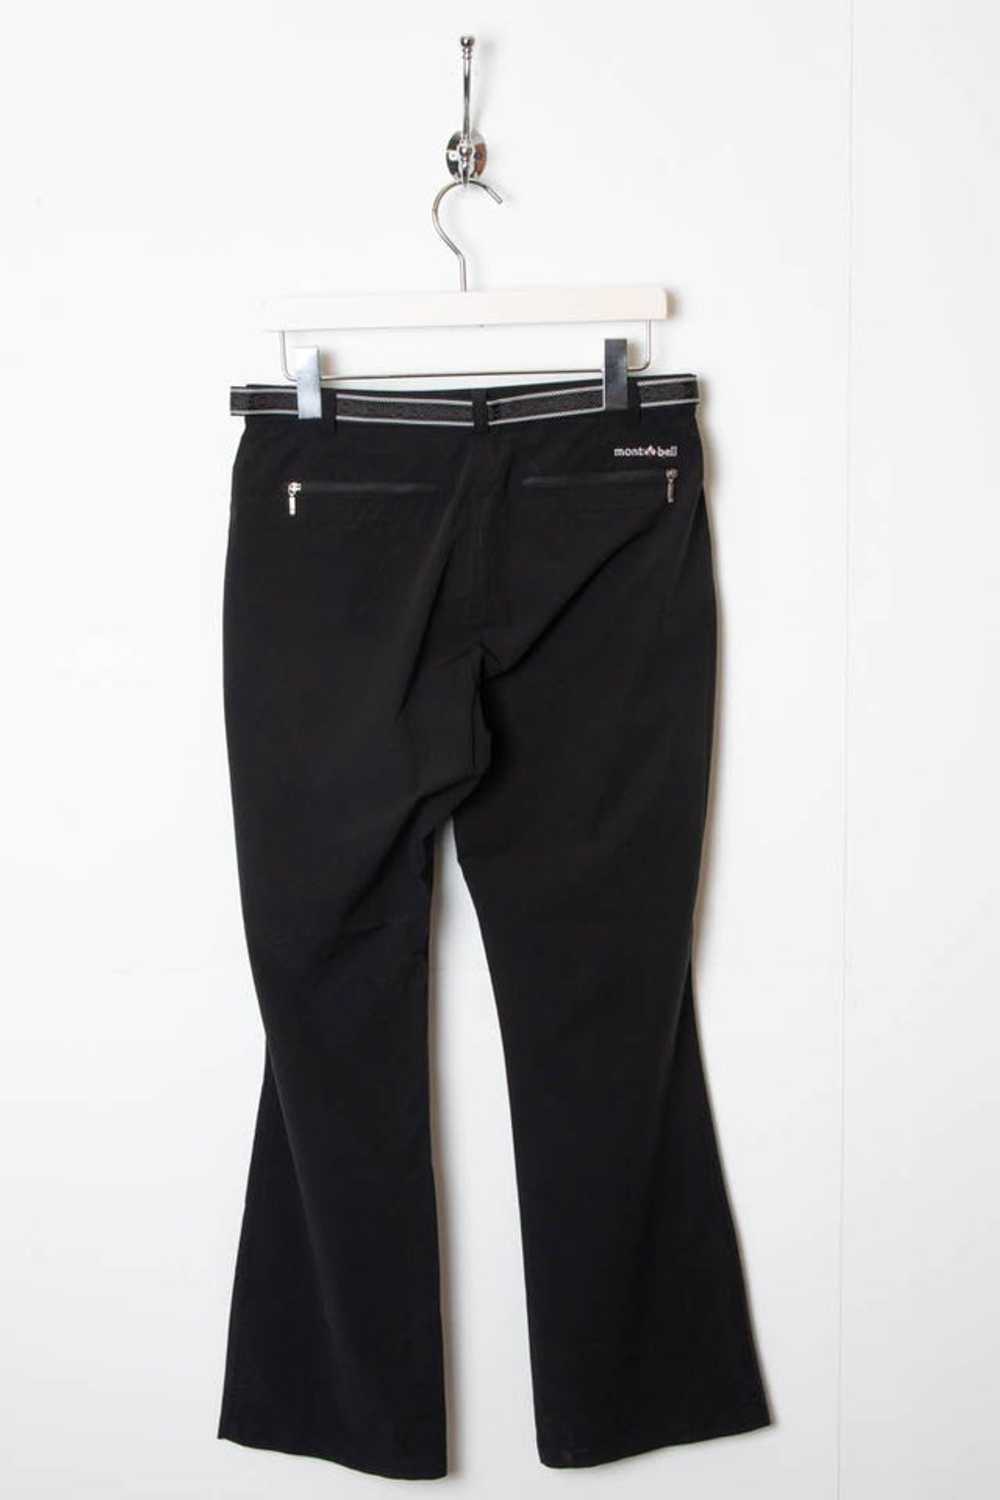 Women's Montbell Pants (M) - image 2